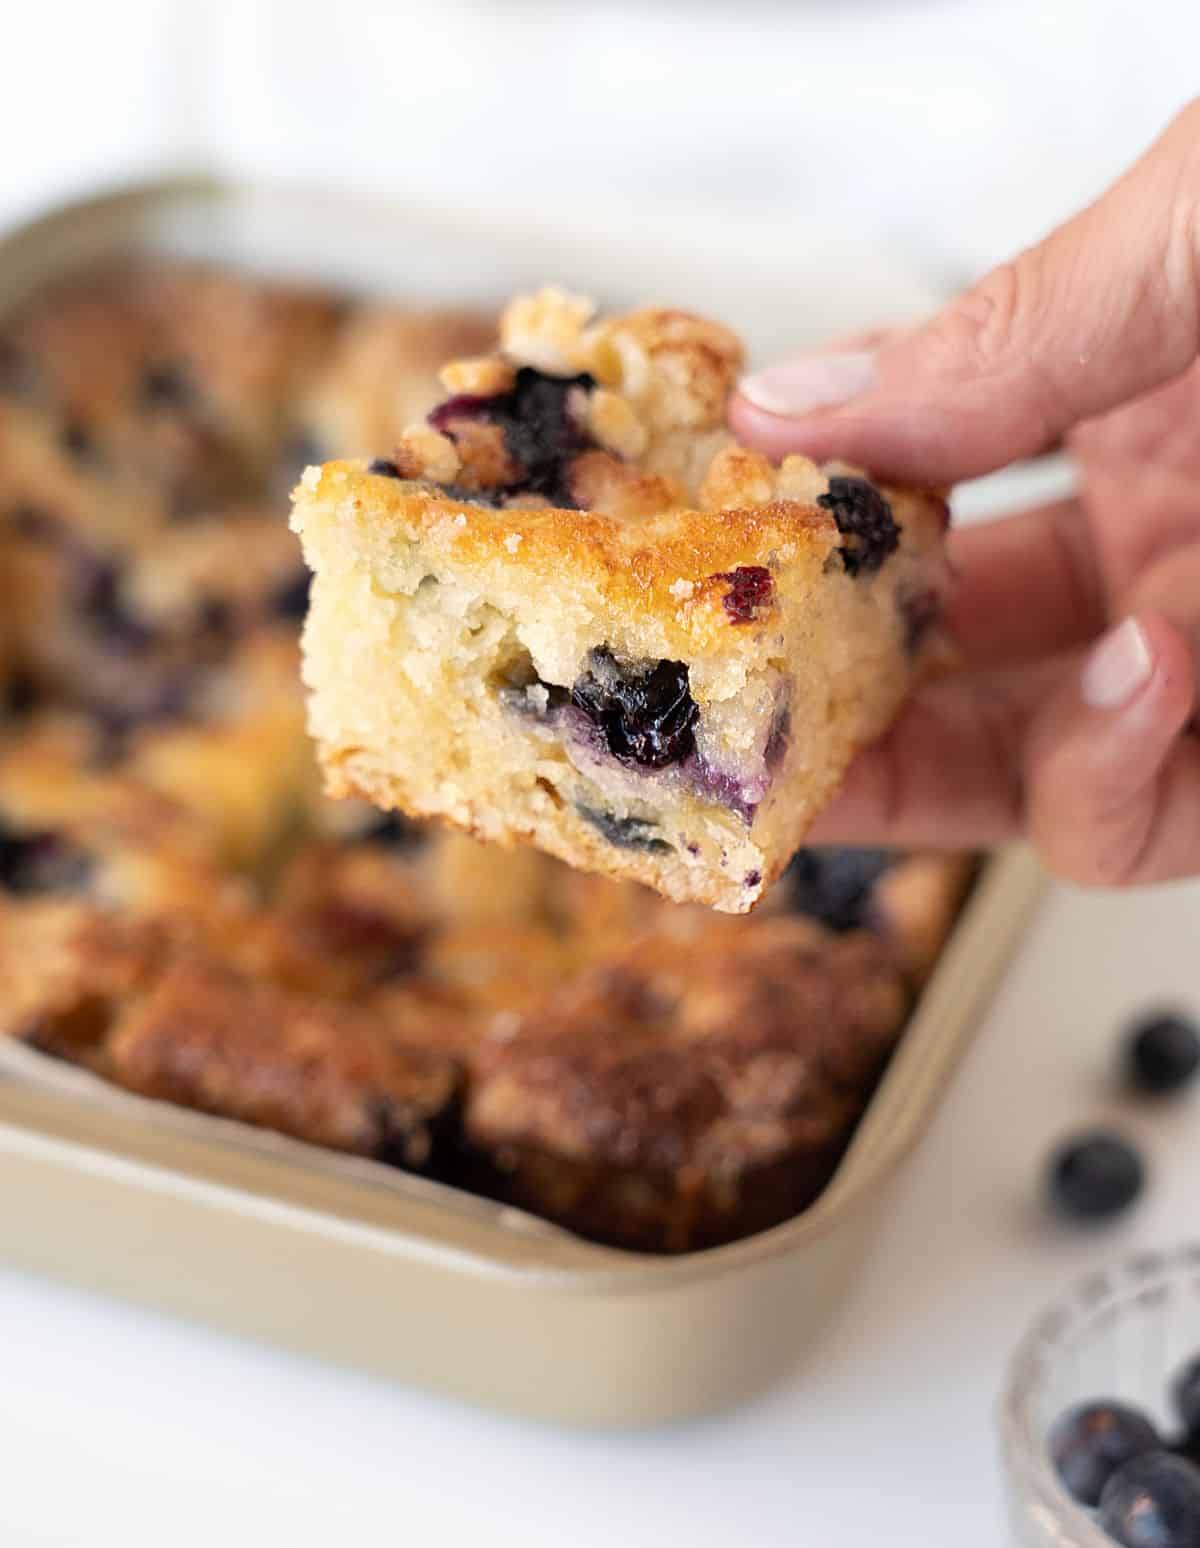 Holding a square of blueberry crumble cake with metal pan and cake in the white background.